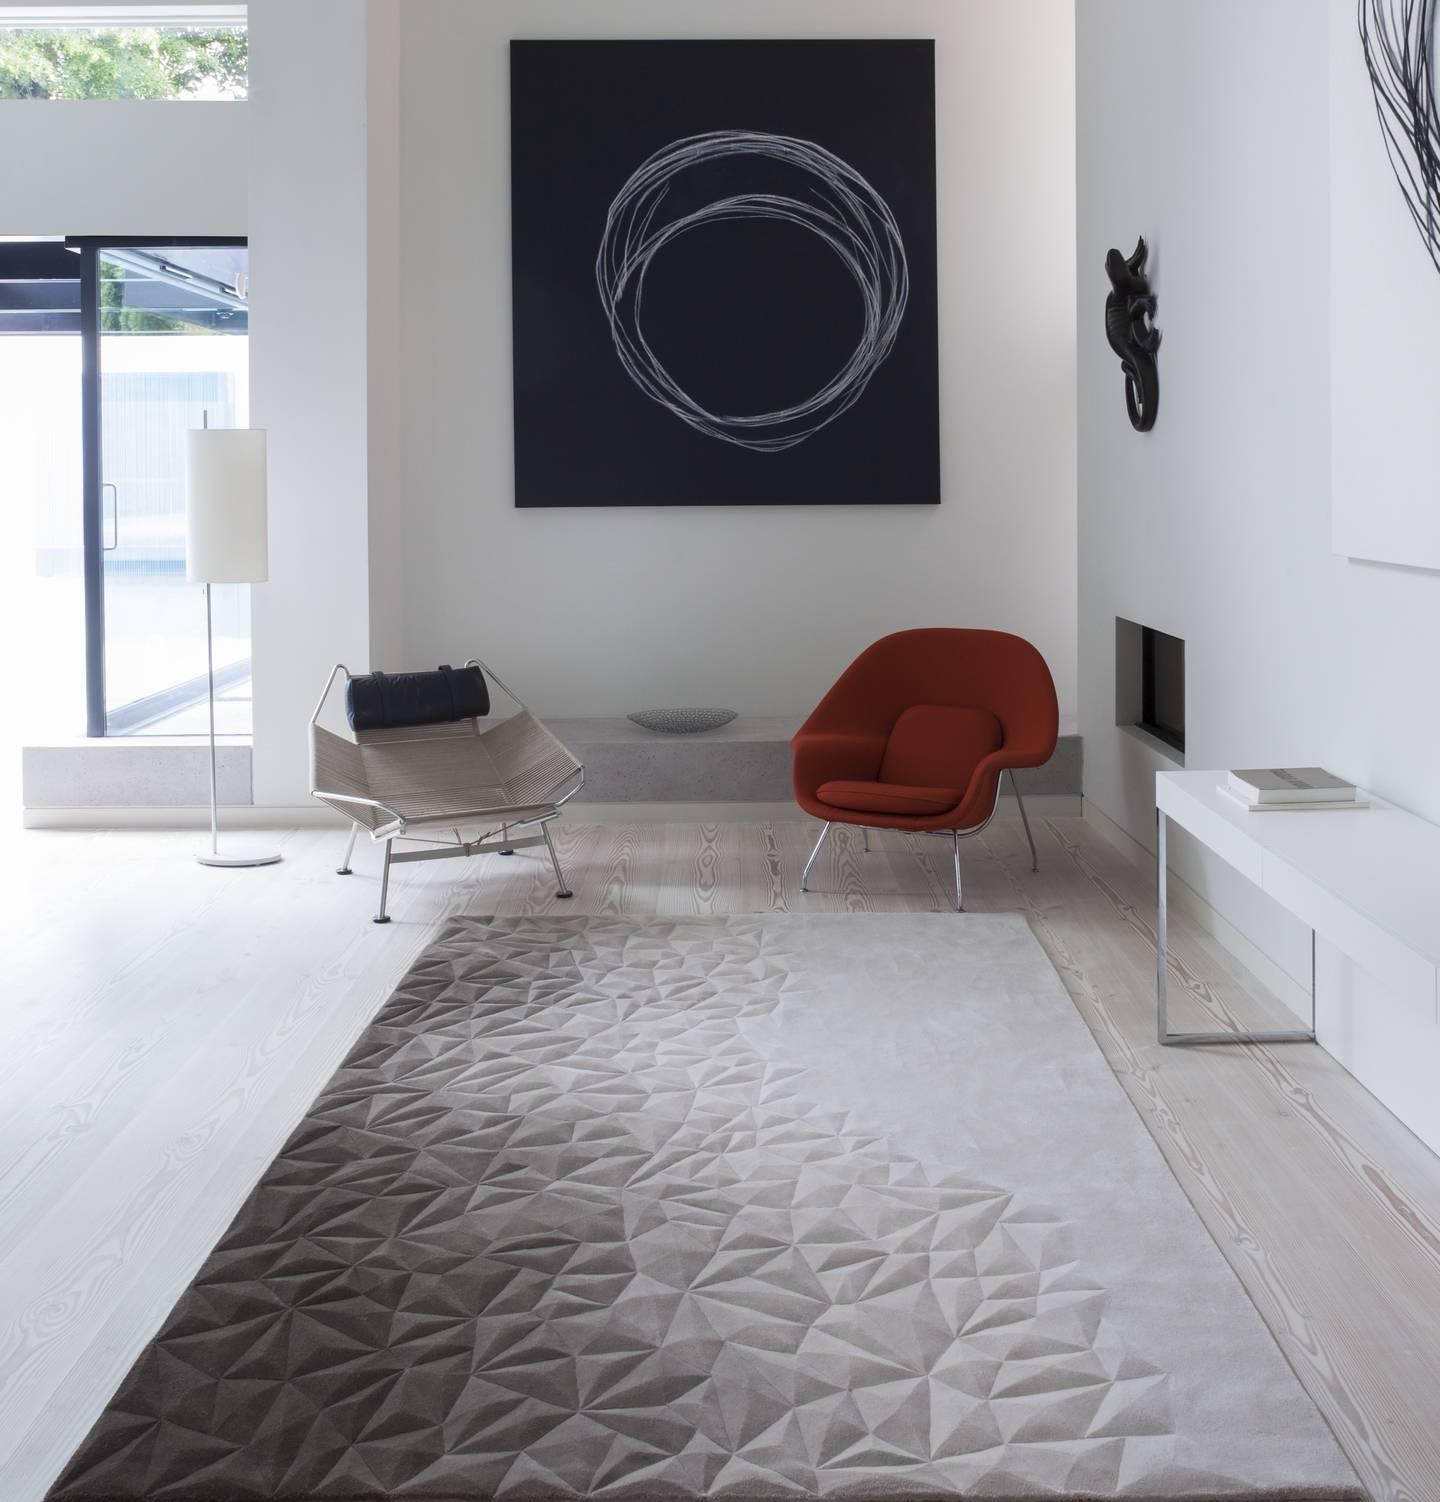 Iconic hand-tufted wool rug featuring ombre colouring and surface hand-carving. Designed by Topfloor's Creative Head and Founder, Esti Barnes. Contemporary classic available to order in any size, colorway or shape. Winner of Interior Design